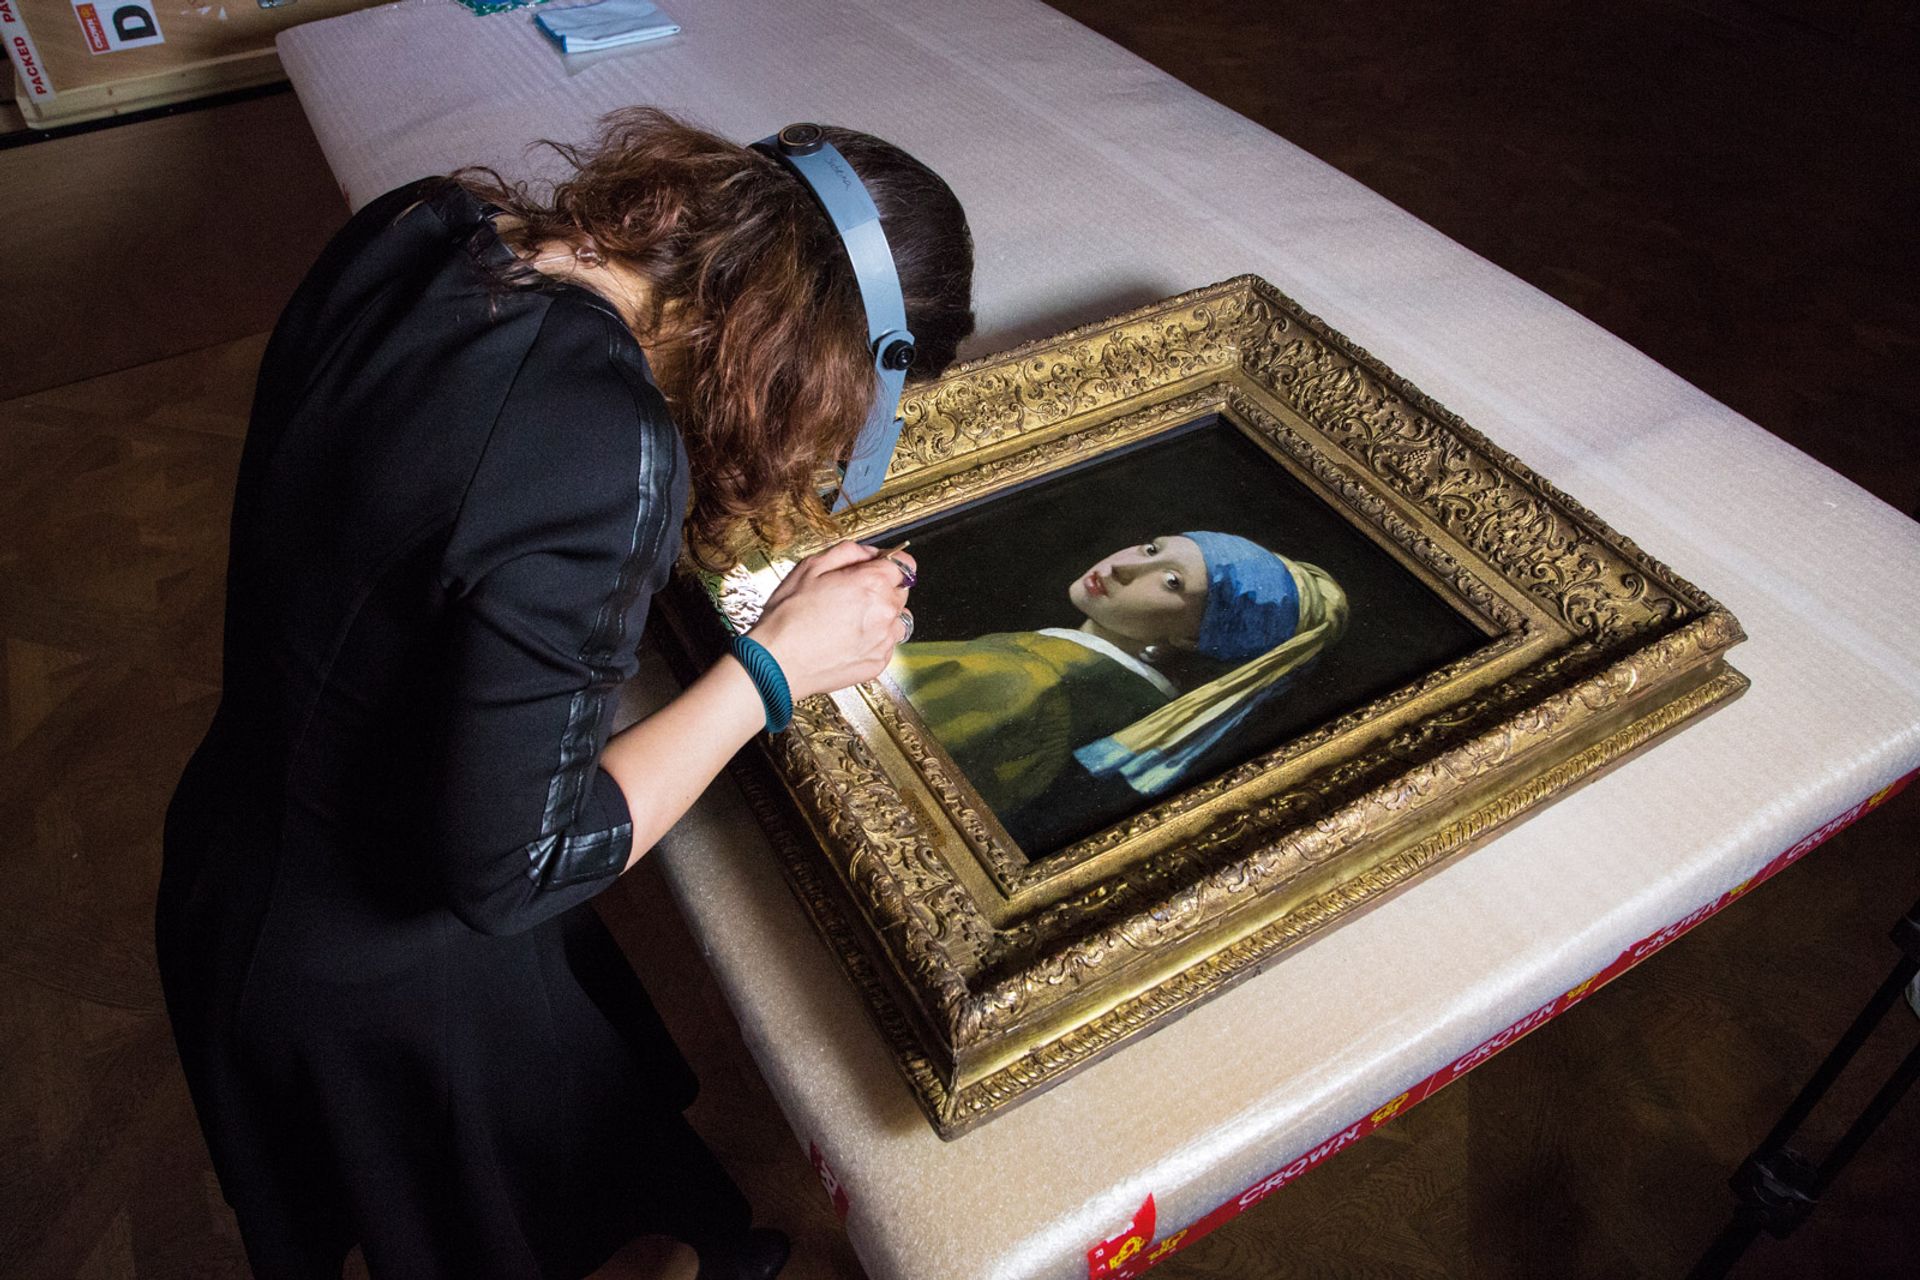 Vermeer’s Girl with a Pearl Earring (around 1665) being analysed in  the Hague Ivo Hoekstra; courtesy of the Mauritshuis, The Hague